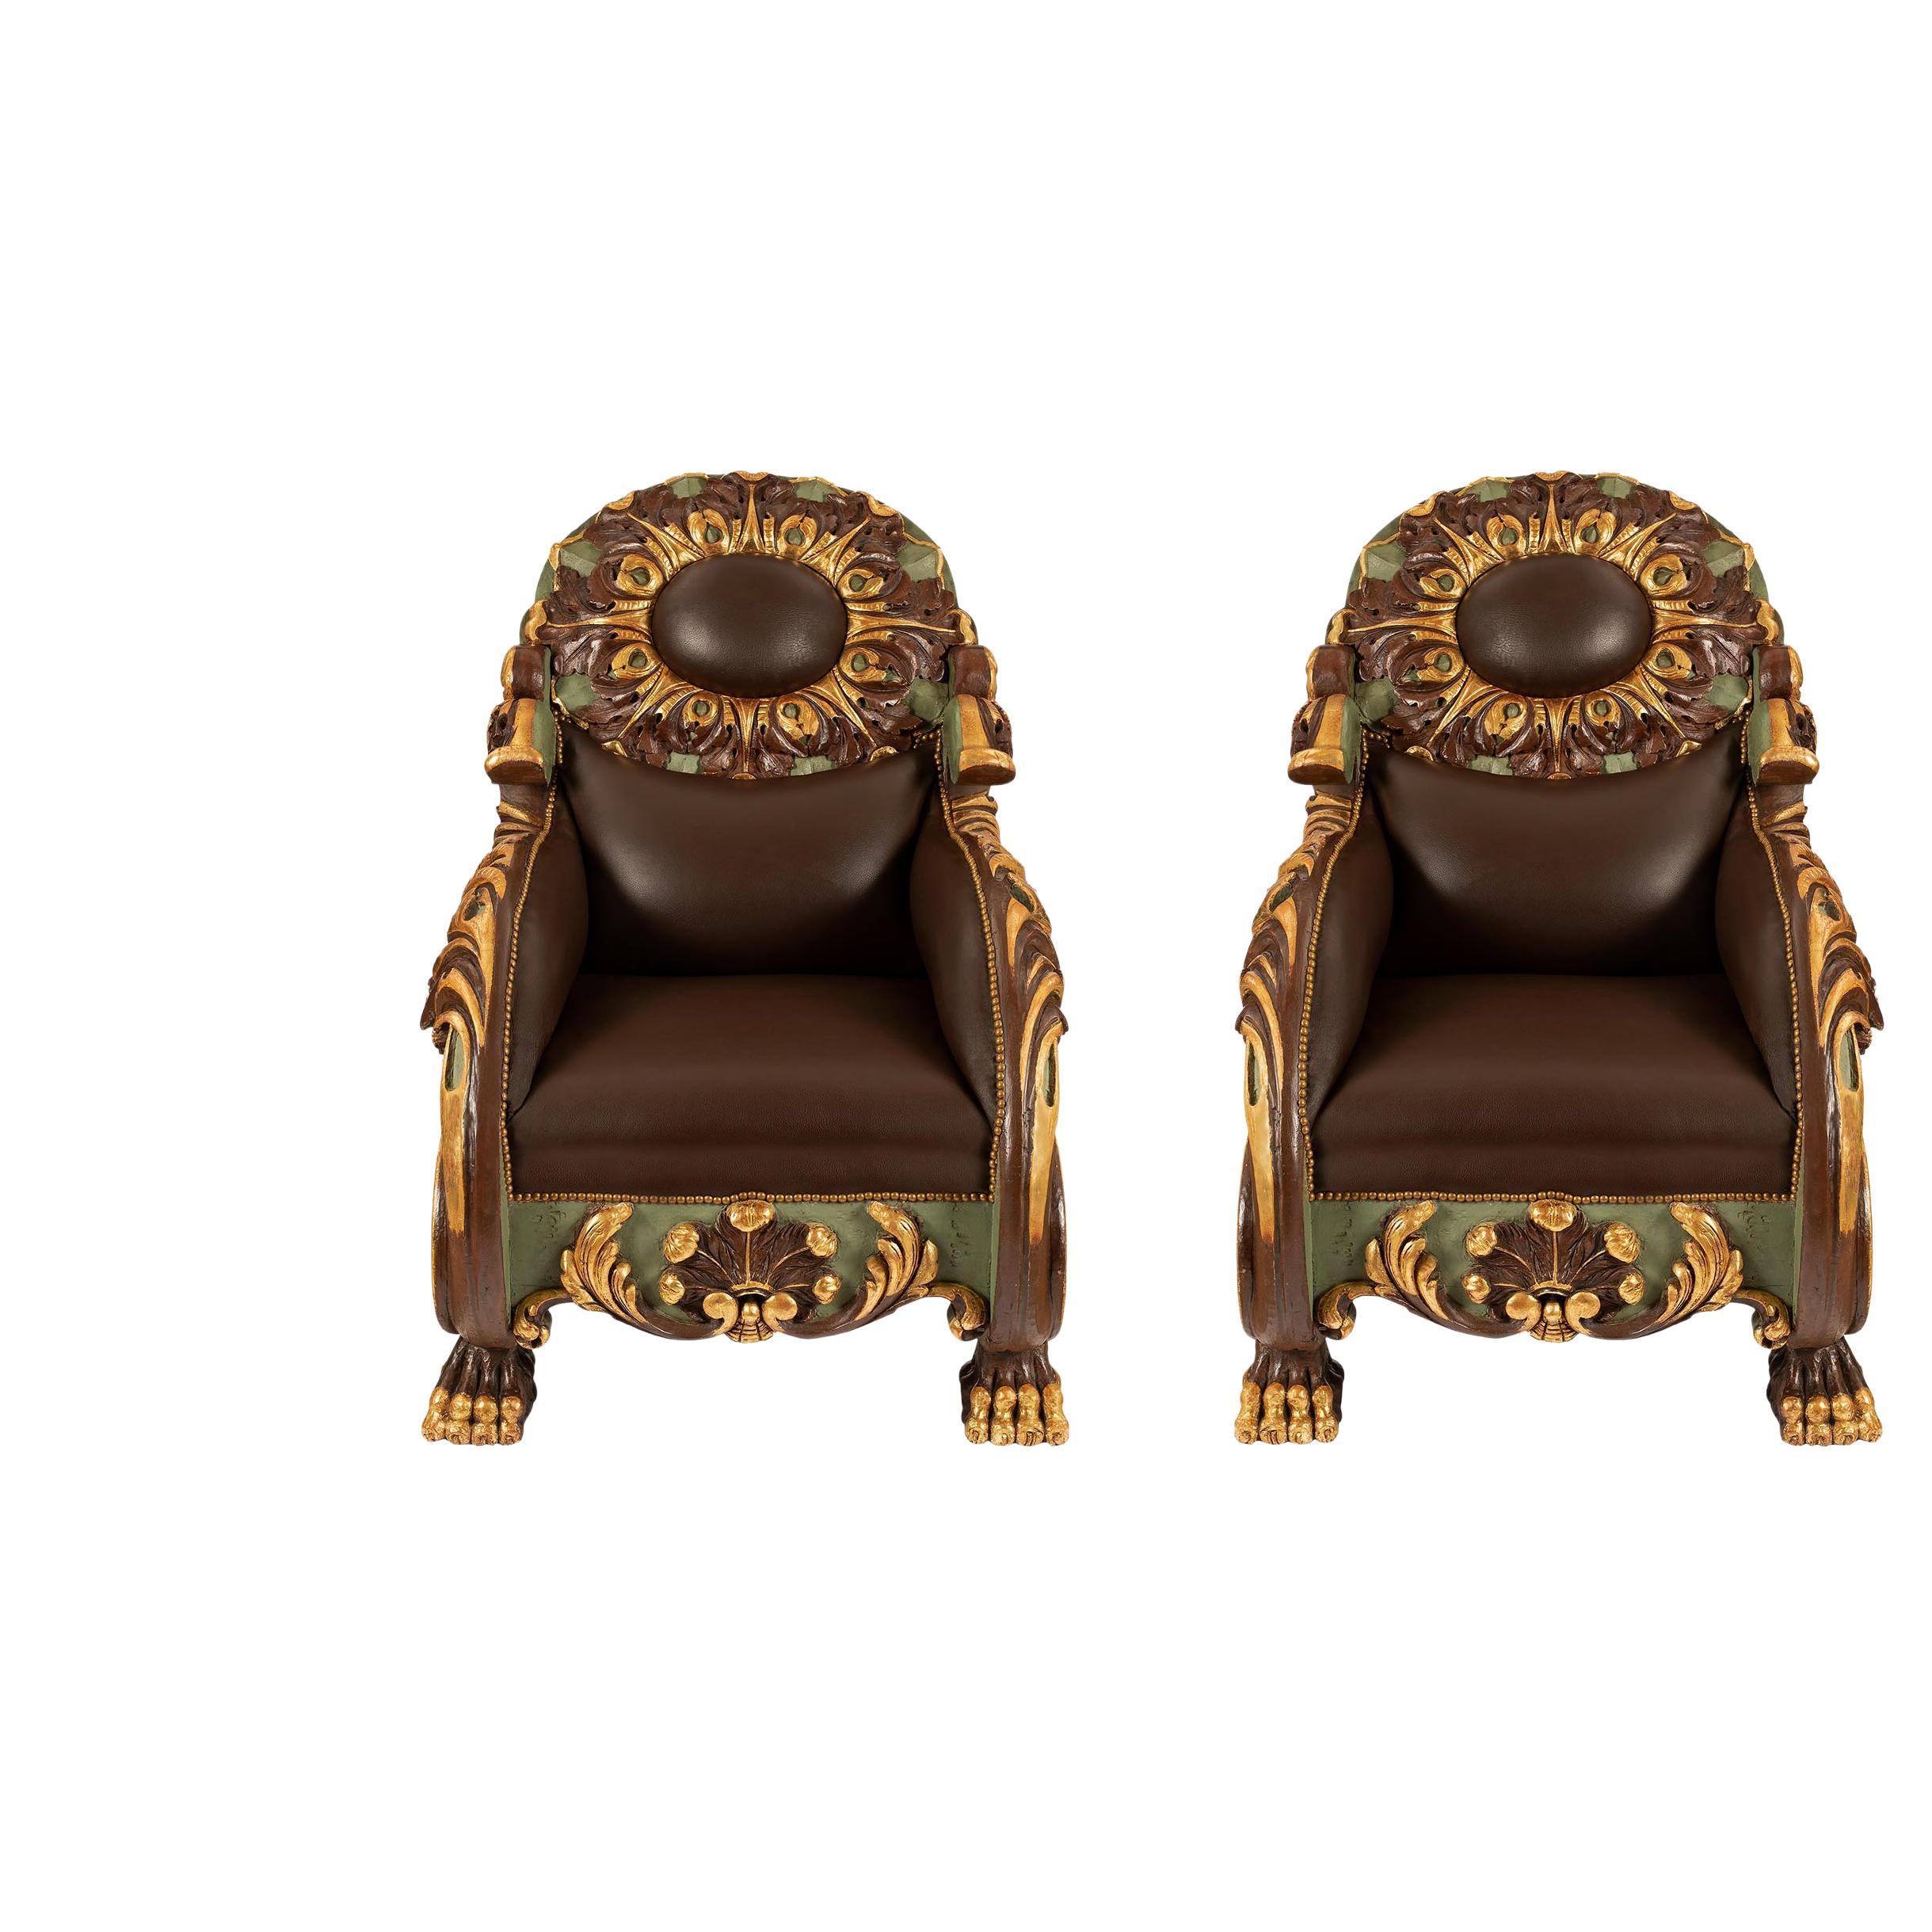 Pair of Italian Early 19th Century Baroque Polychrome and Giltwood Armchairs For Sale